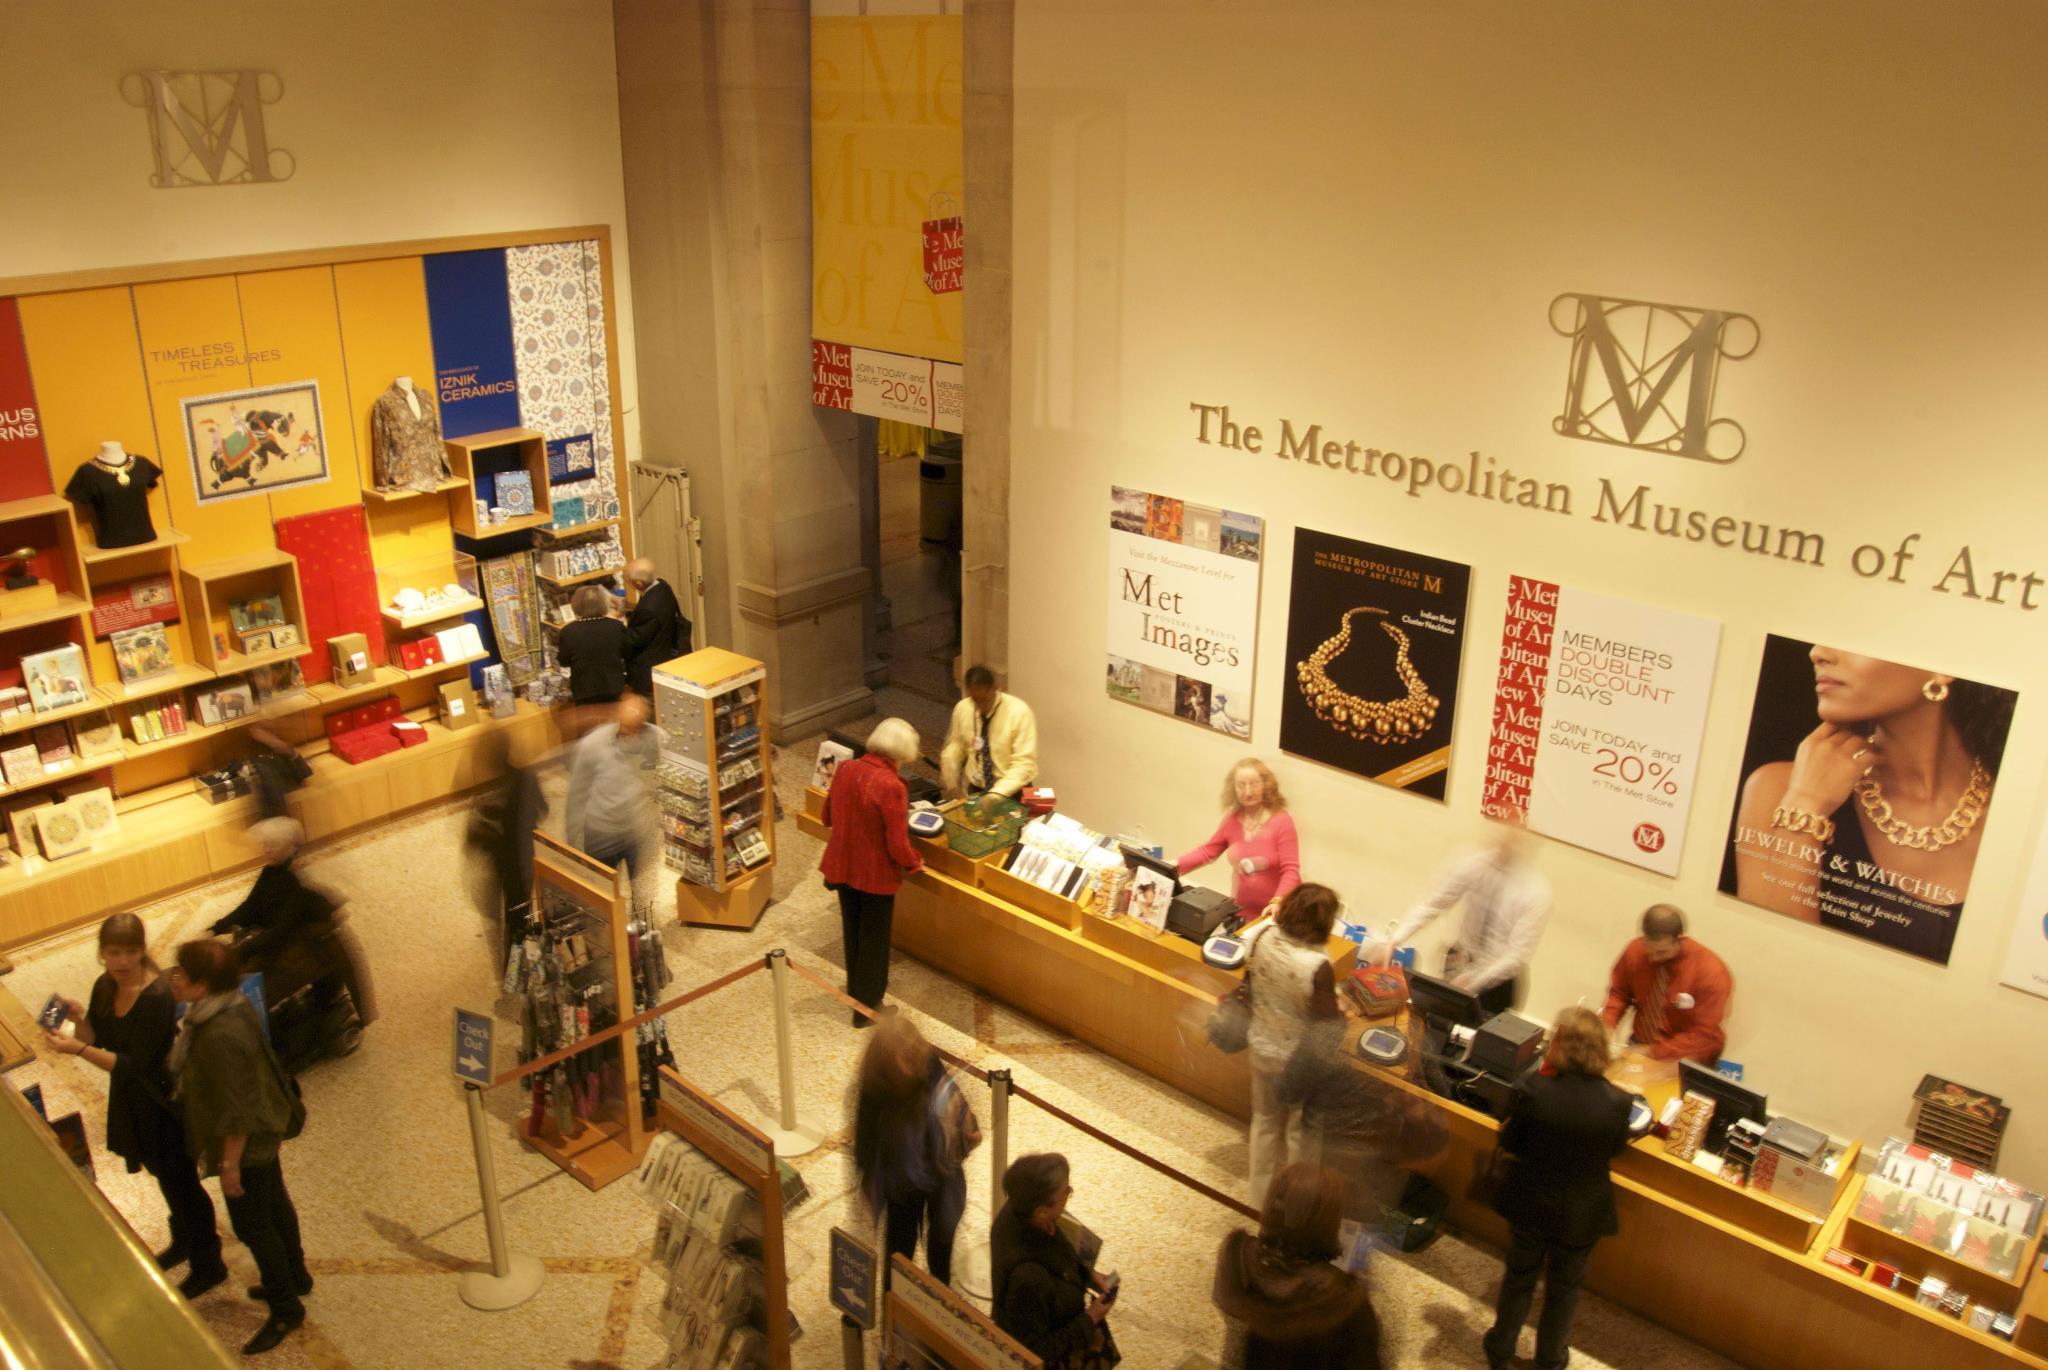 The Metropolitan Museum of Art Store Shopping in Central Park, New York